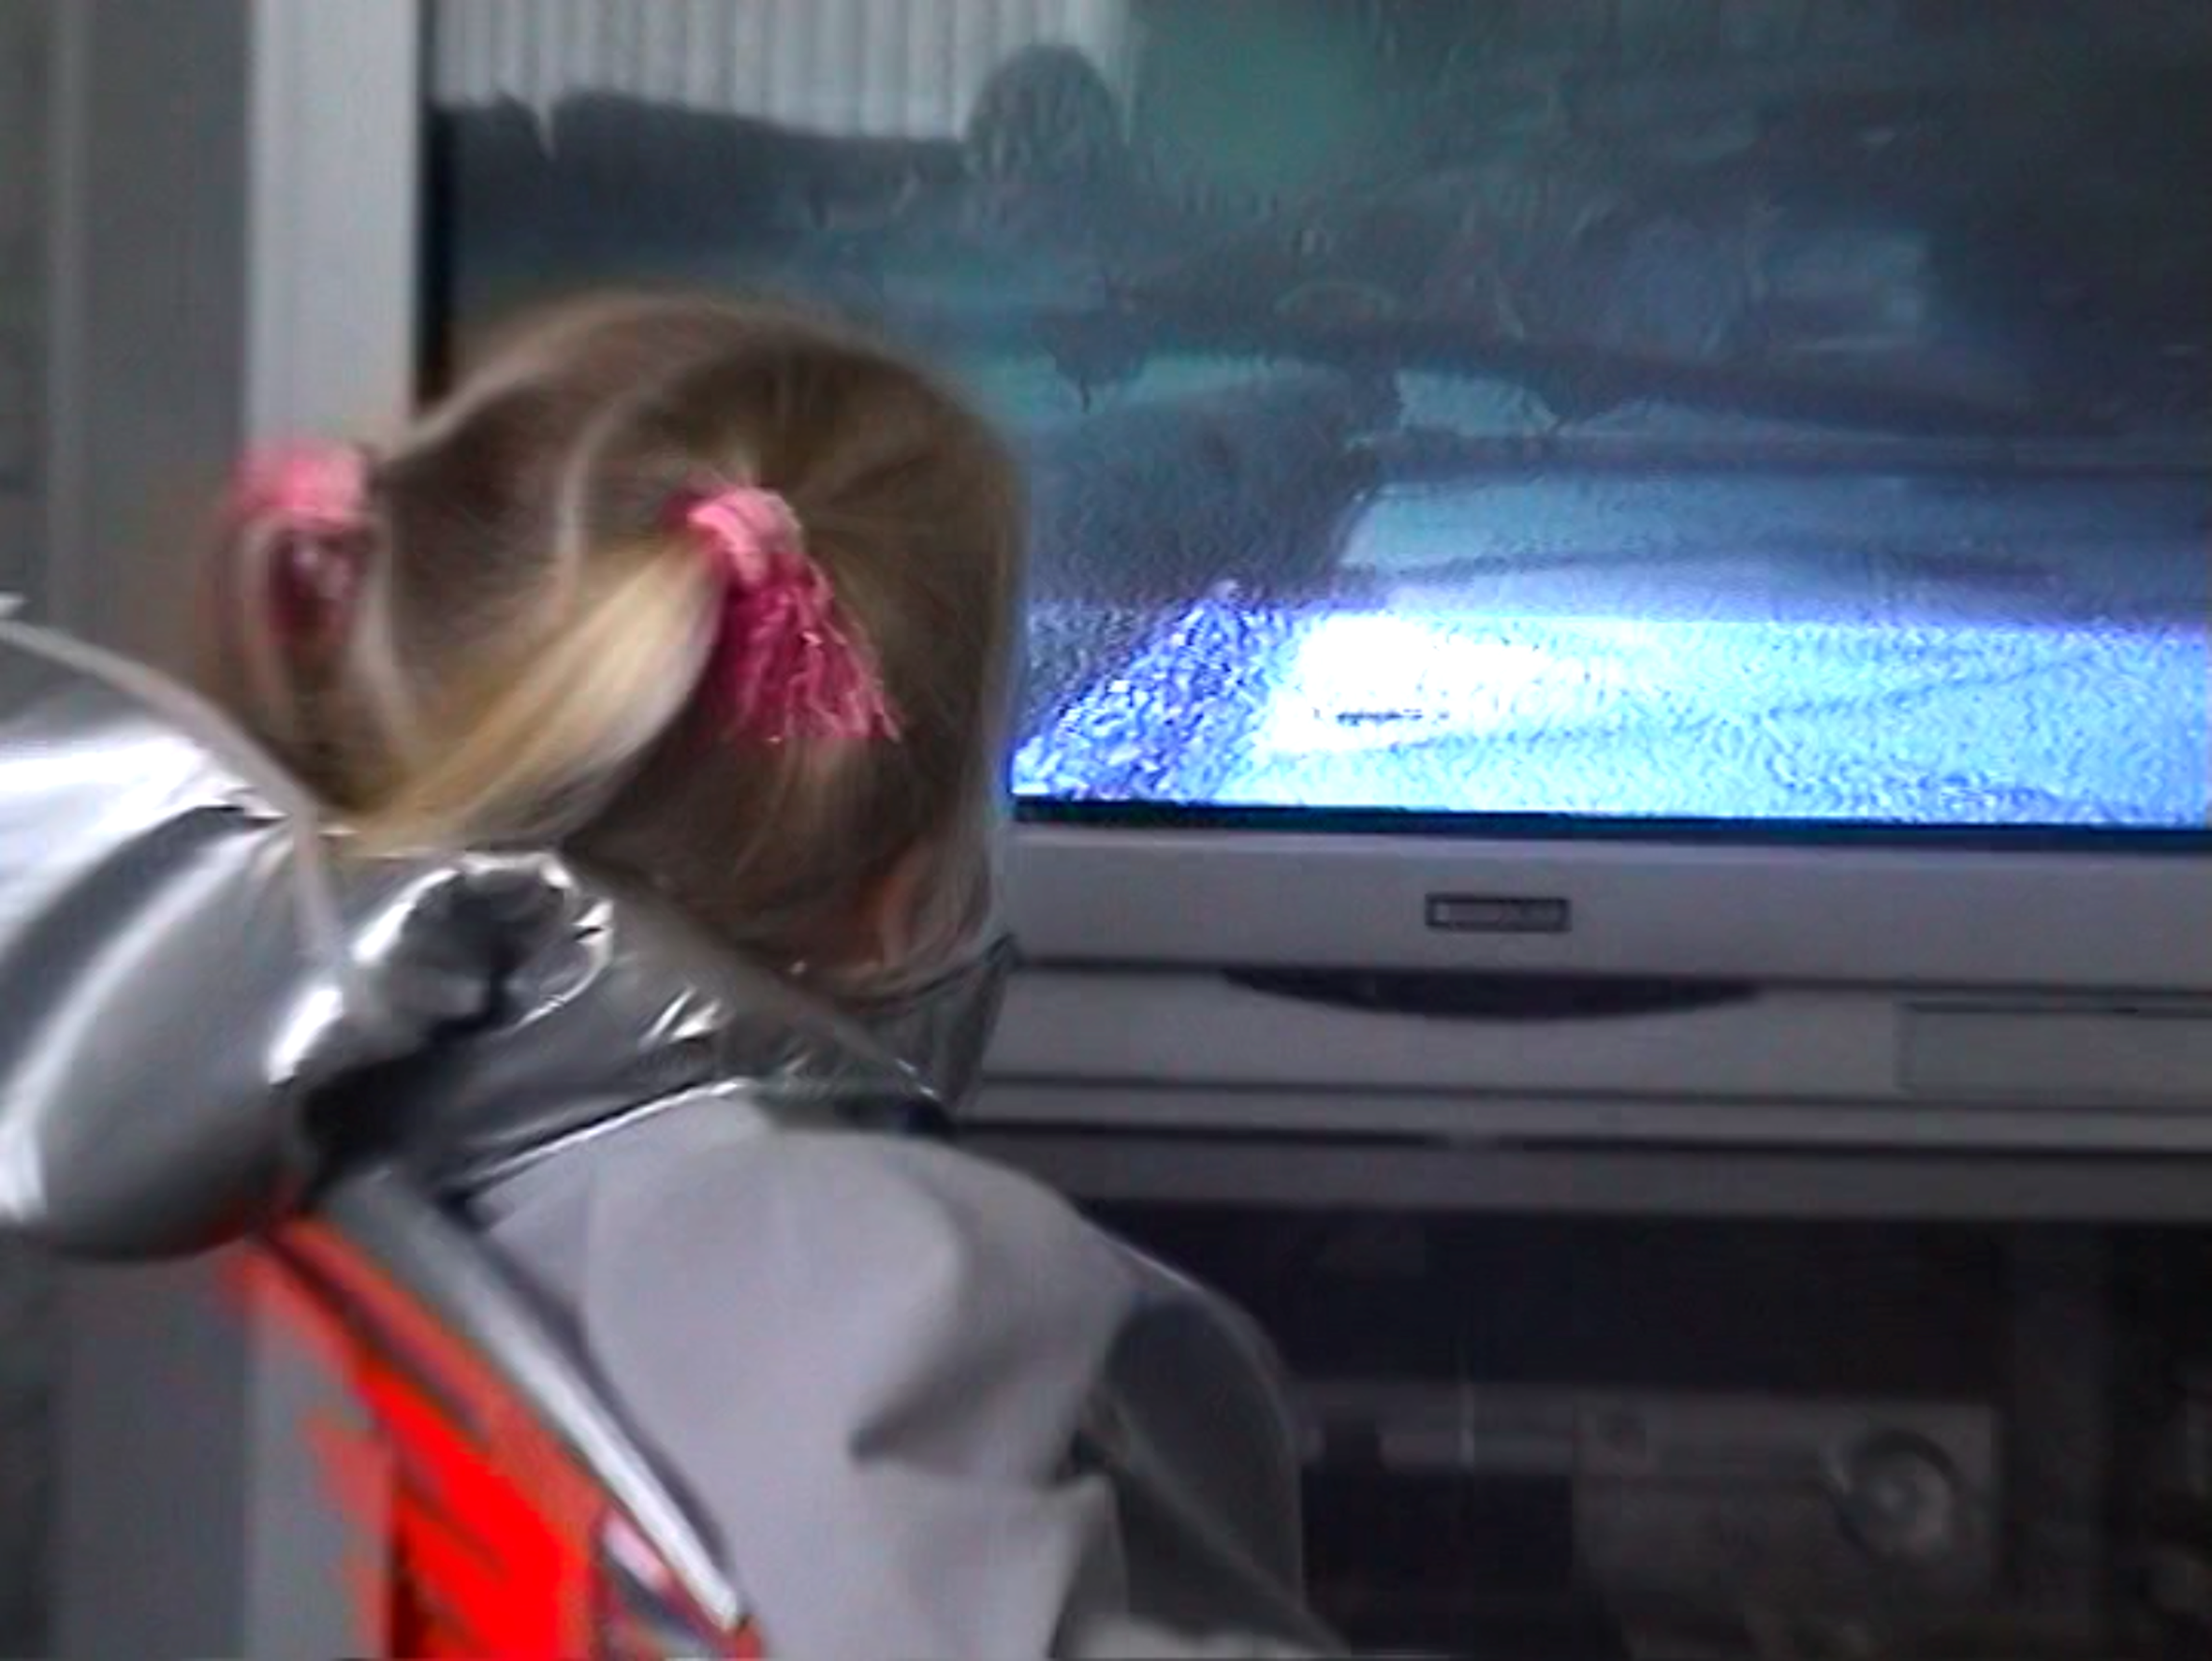 video still of a child looking at a TV screen